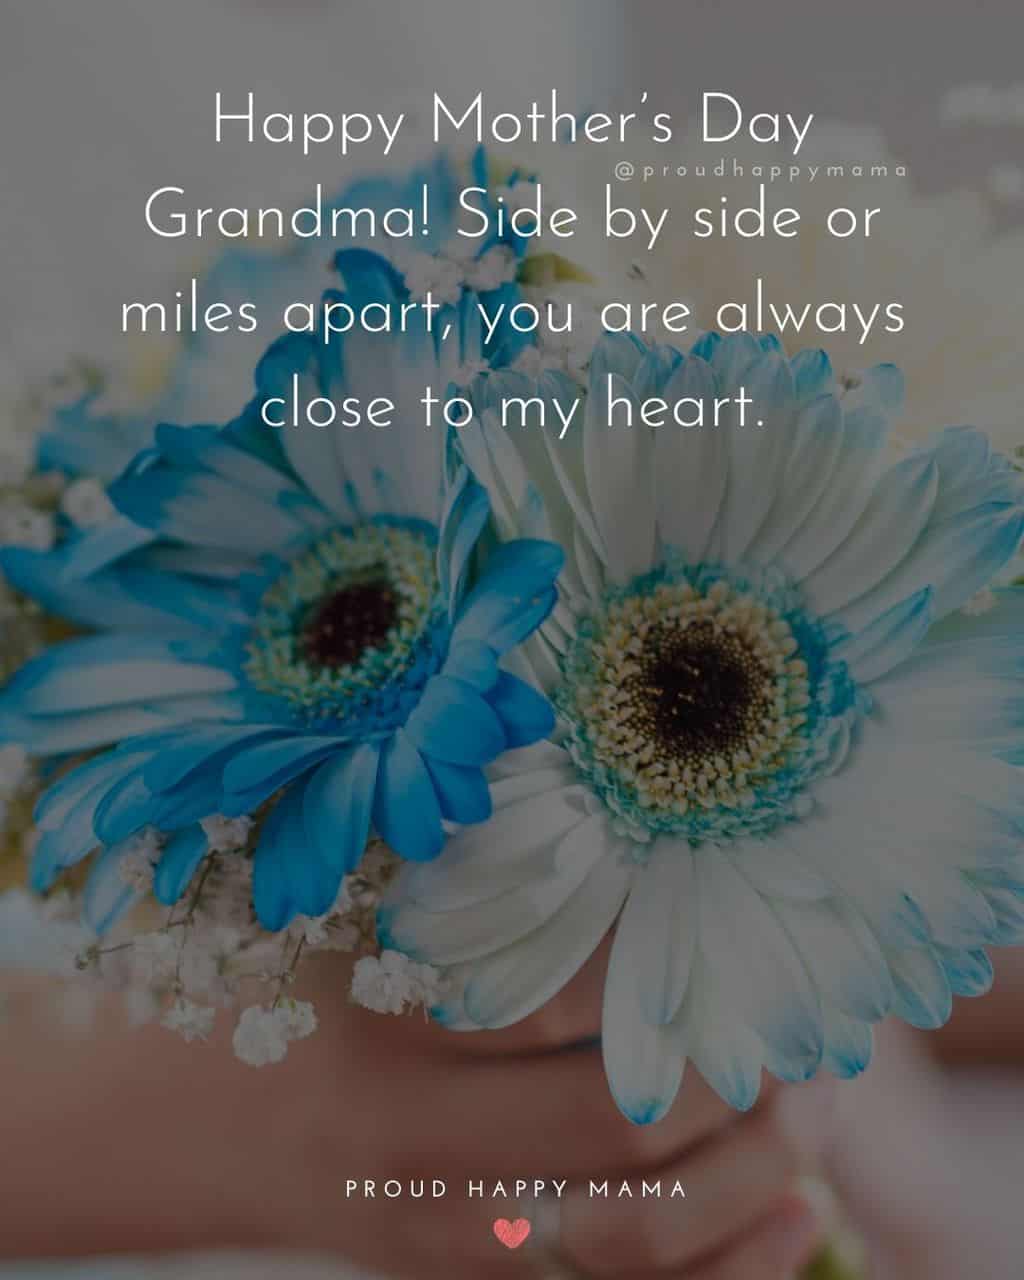 Happy Mothers Day Quotes To Grandma - Happy Mother’s Day Grandma! Side by side or miles apart, you are always close to my 